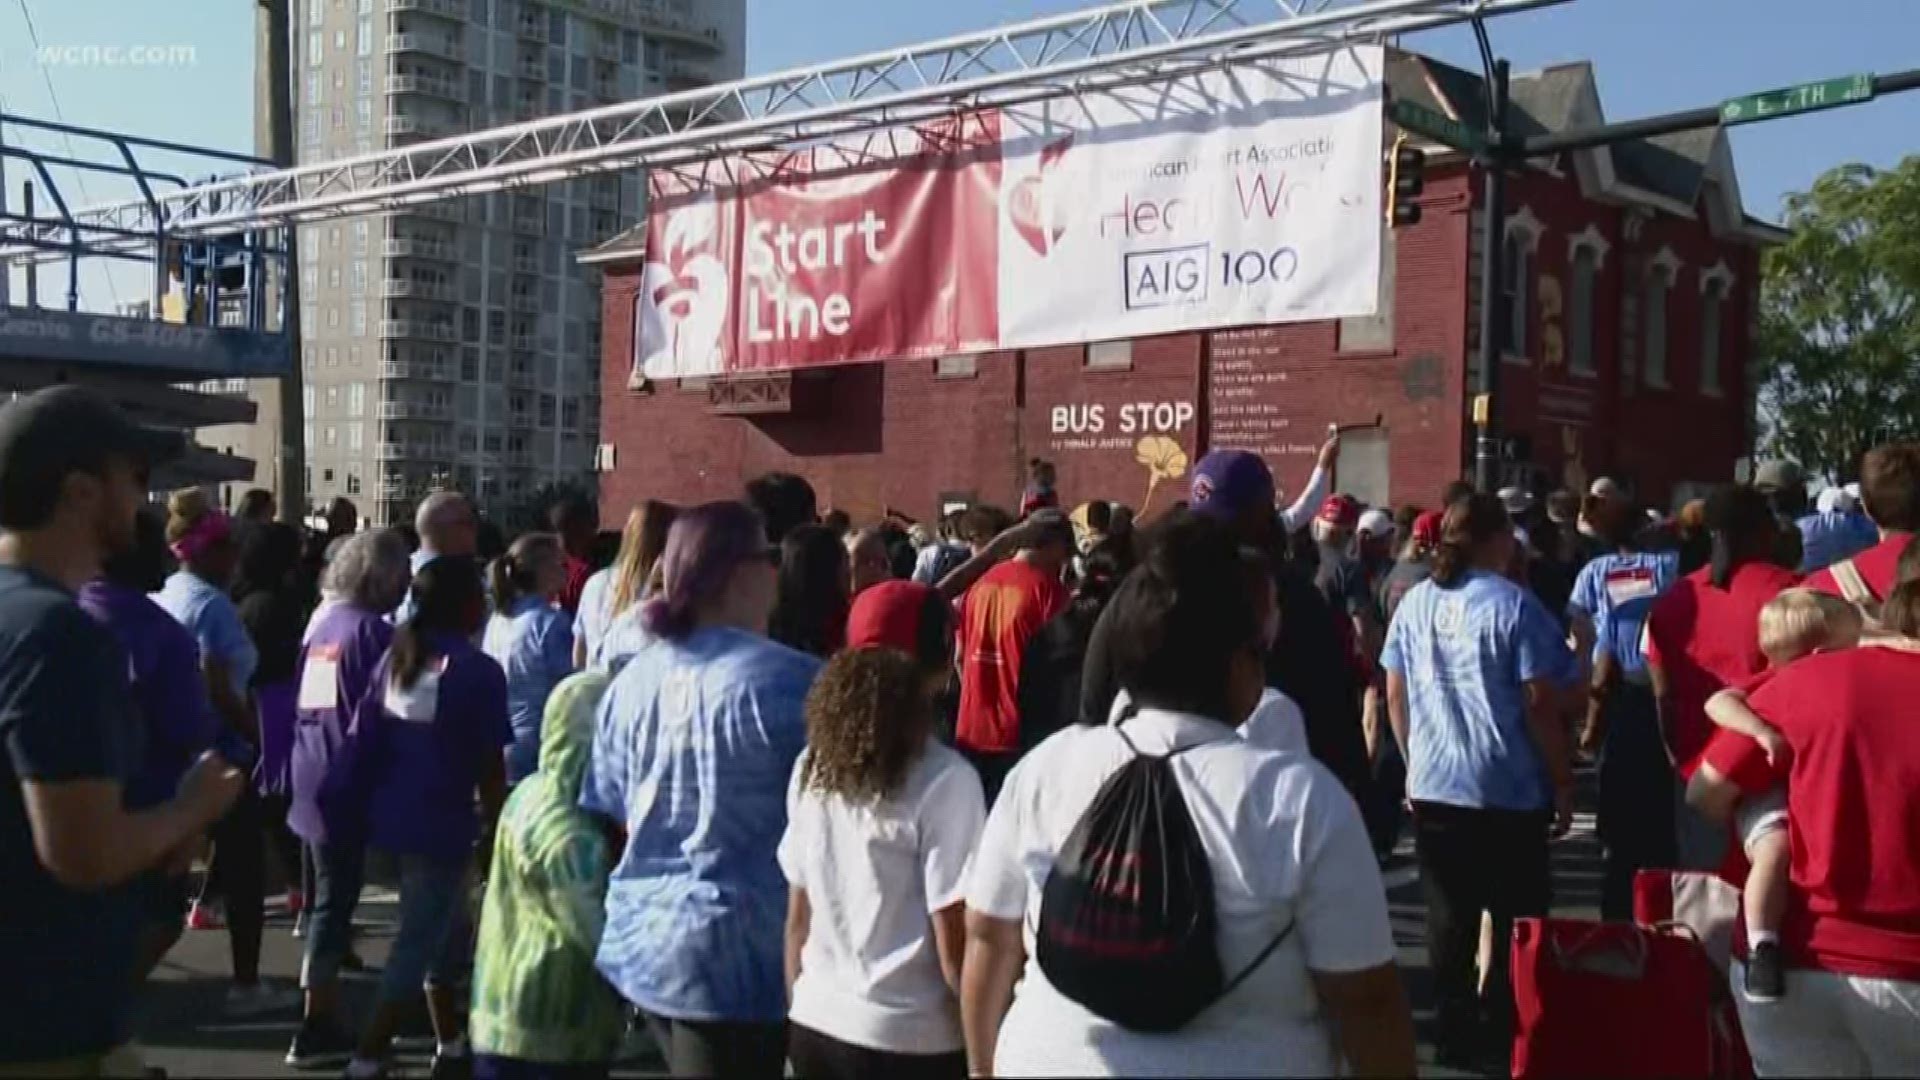 Thousands participate in Heart Walk this weekend in uptown Charlotte